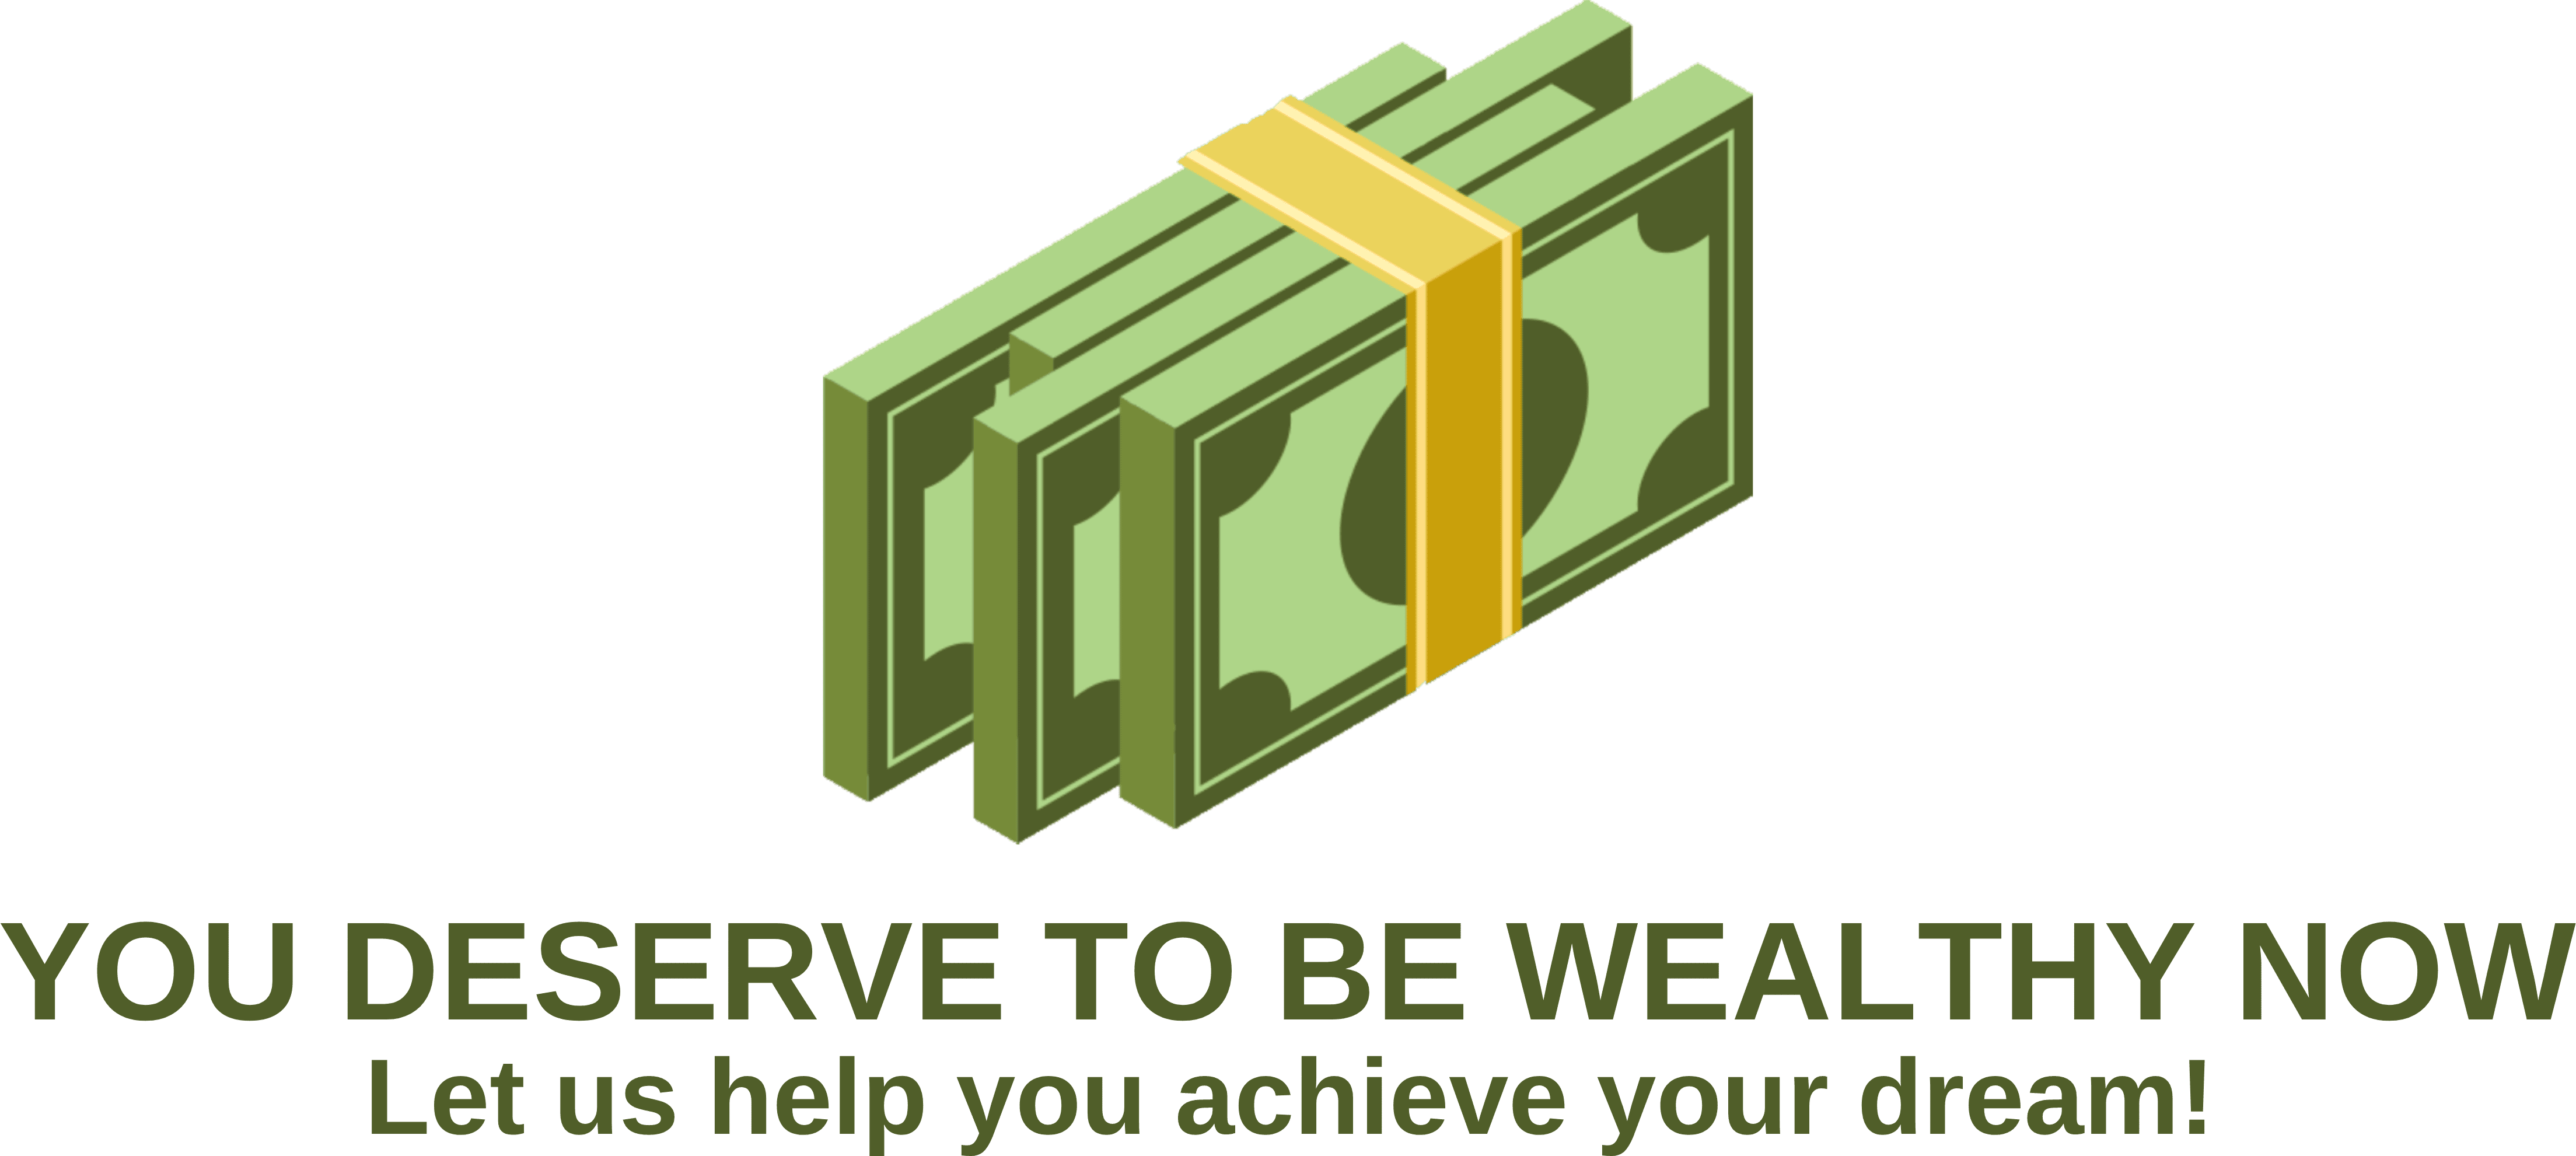 You Deserve to be Wealthy Now Logo